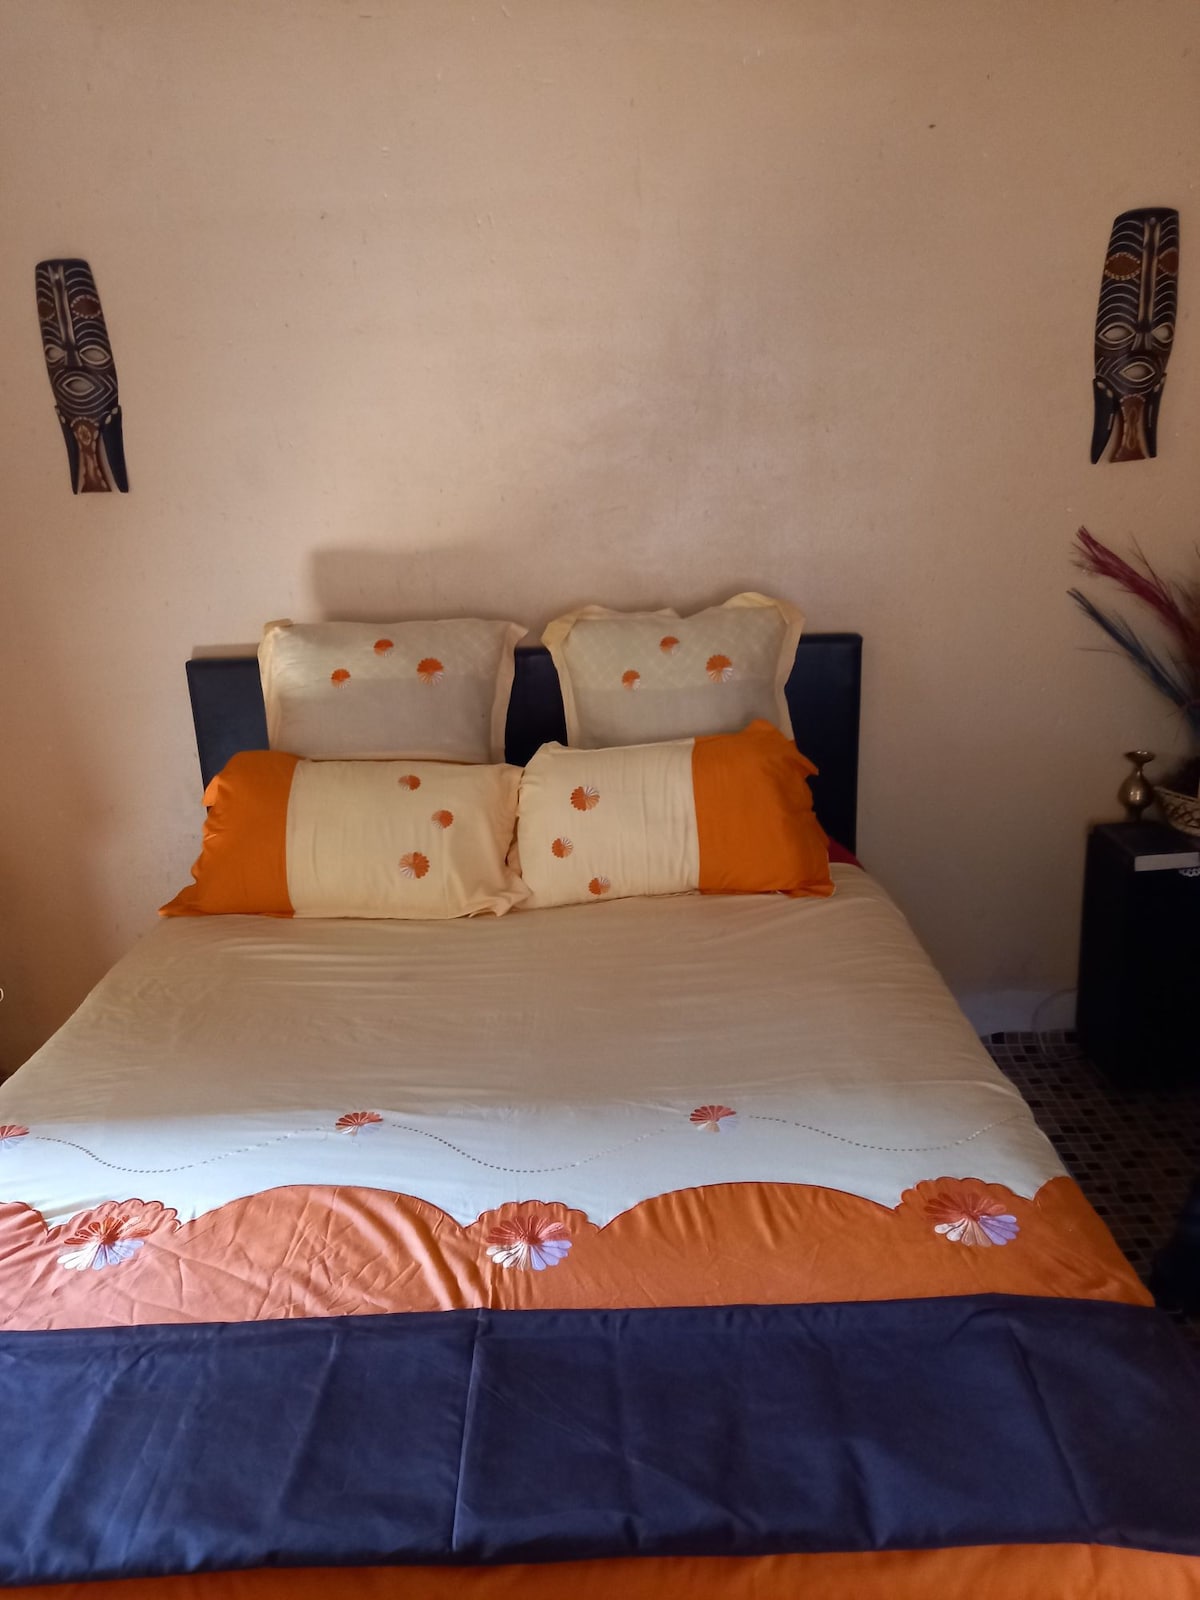 Ekhaya Guest House. A secure place to rest & relax